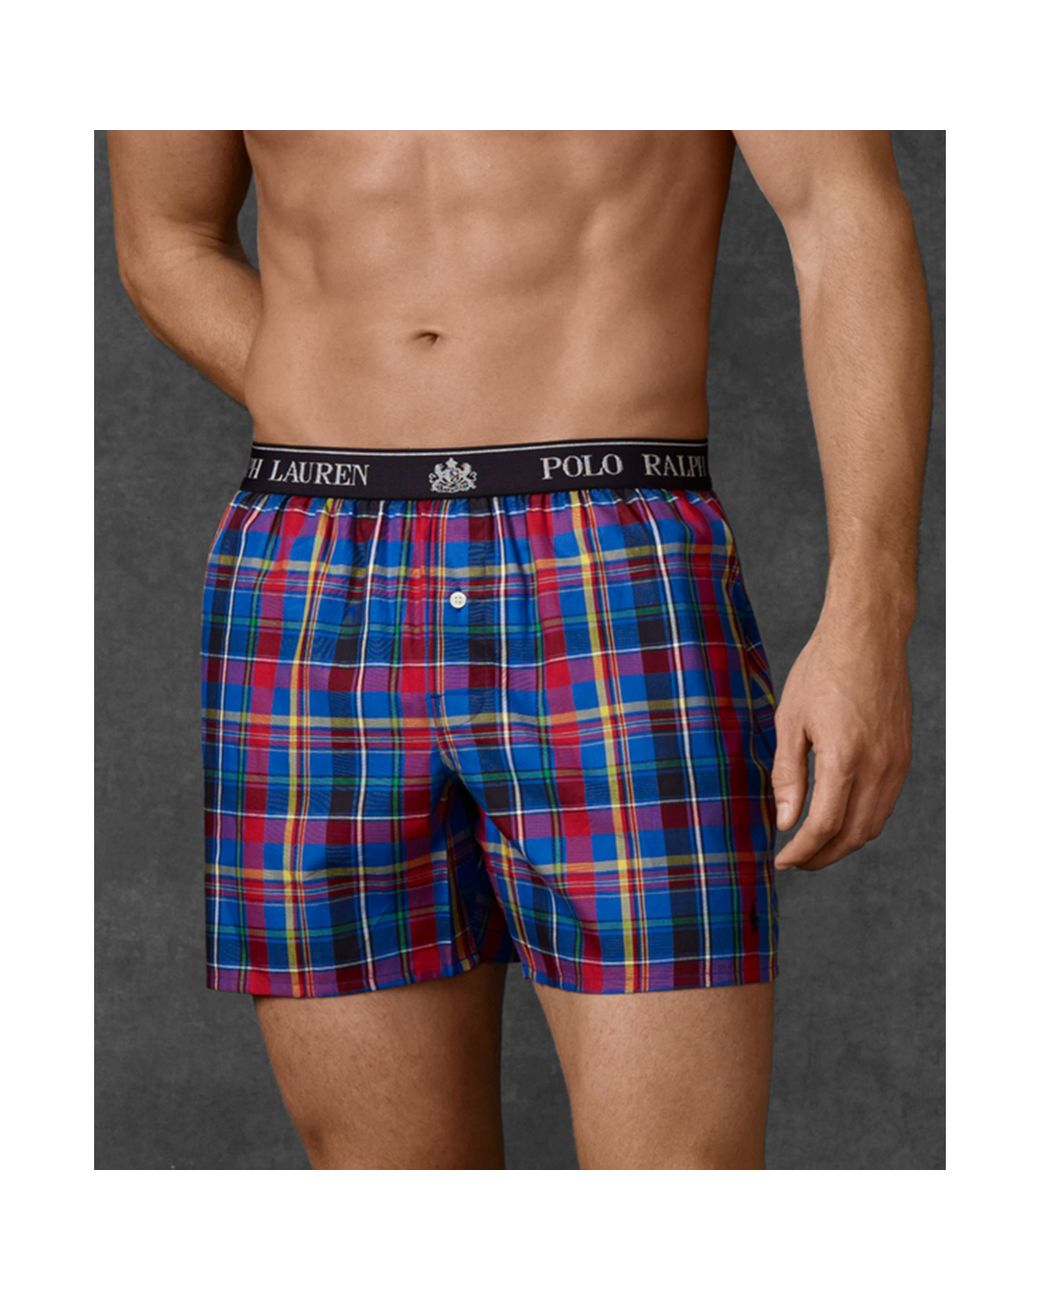 Monogrammed Boxers / Women's Boxer Shorts / Personalized Plaid